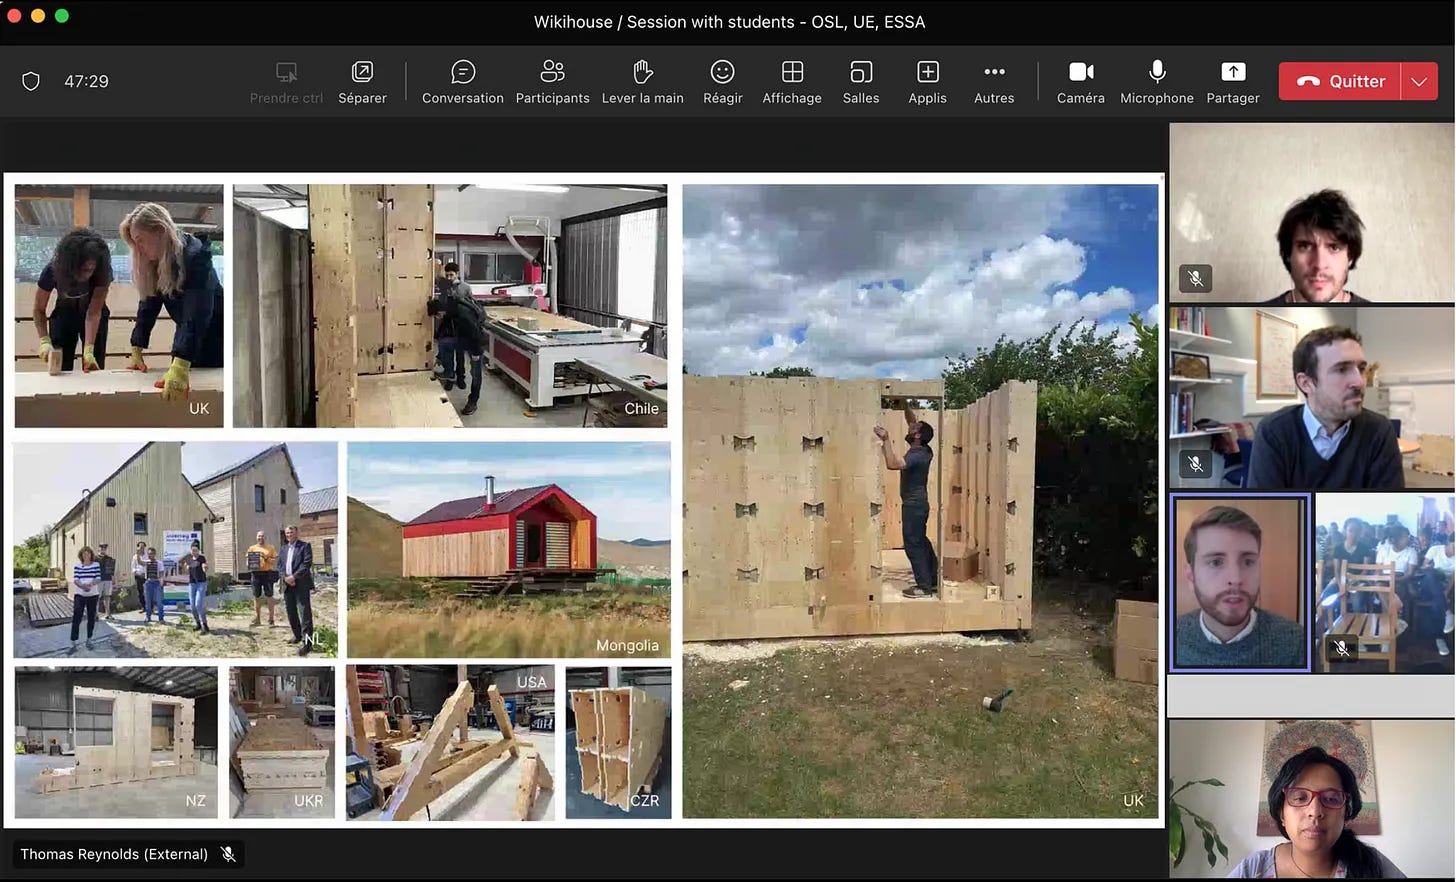 Screenshot of WikiHouse workshop, showing a gallery of WikiHouses on the left hand side, and 4 people delivering the session on the right hand side.